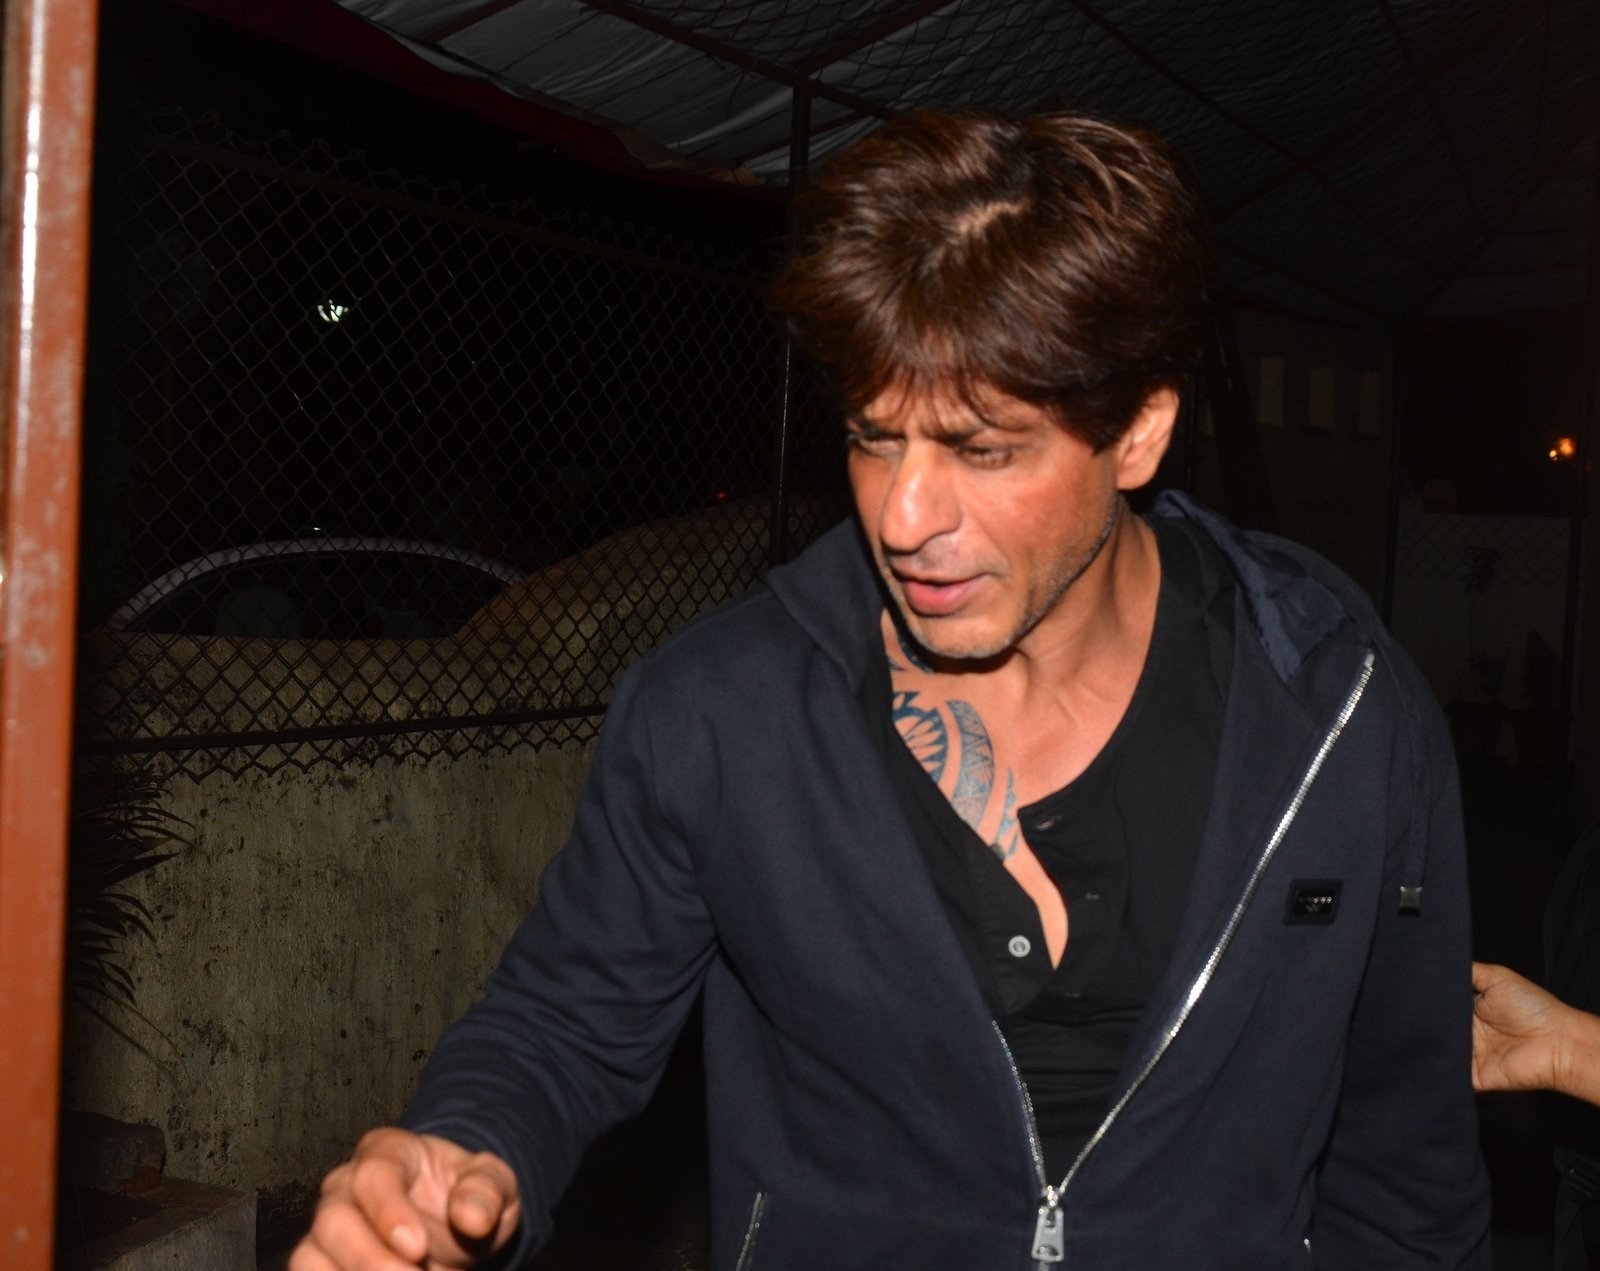 Hang On One Second, Is That A Tattoo On Shah Rukh Khan's